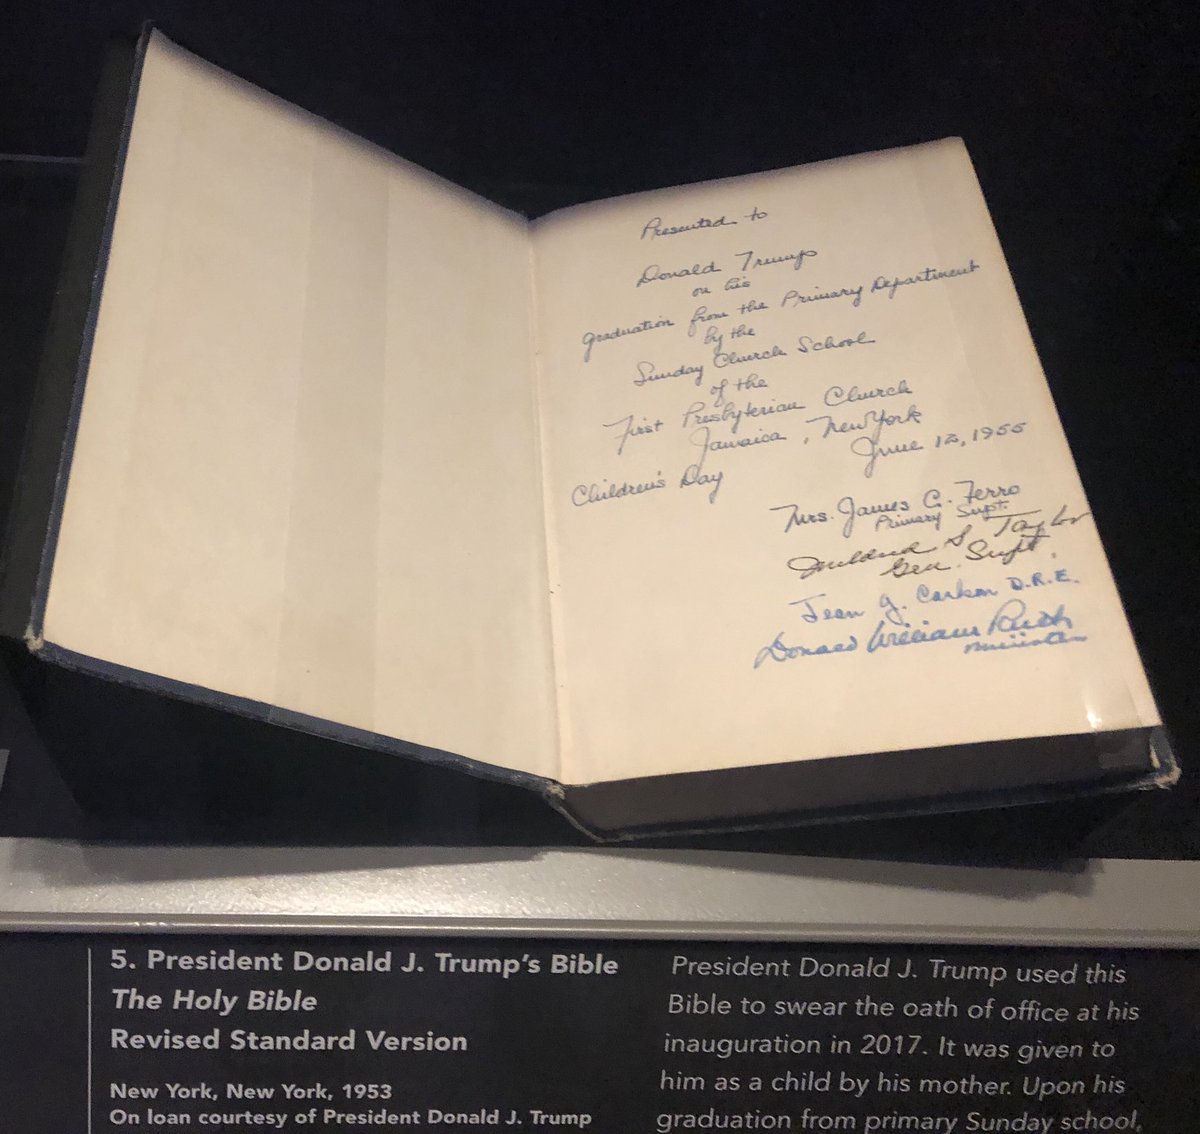 At the Museum of the Bible in Washington DC is the childhood bible belonging to @realDonaldTrump. It reads “Presented to Donald Trump on his graduation from the Primary Department by the Sunday Church School of the Presbyterian Church in Jamaica, NY Children’s Day, June 12, 1955”